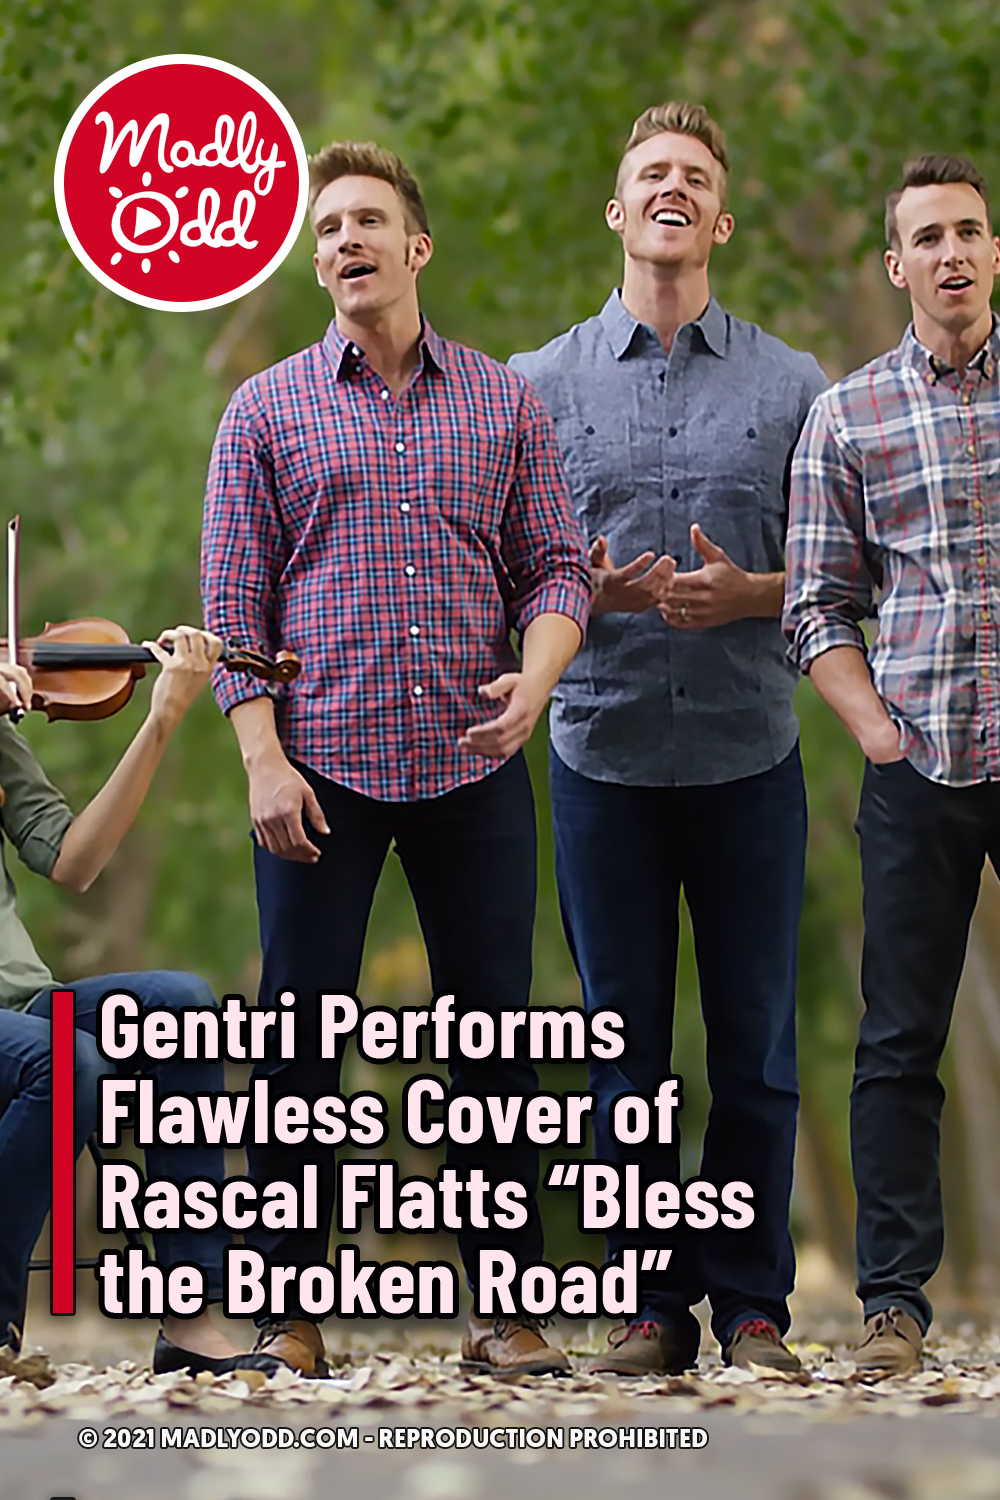 Gentri Performs Flawless Cover of Rascal Flatts “Bless the Broken Road”